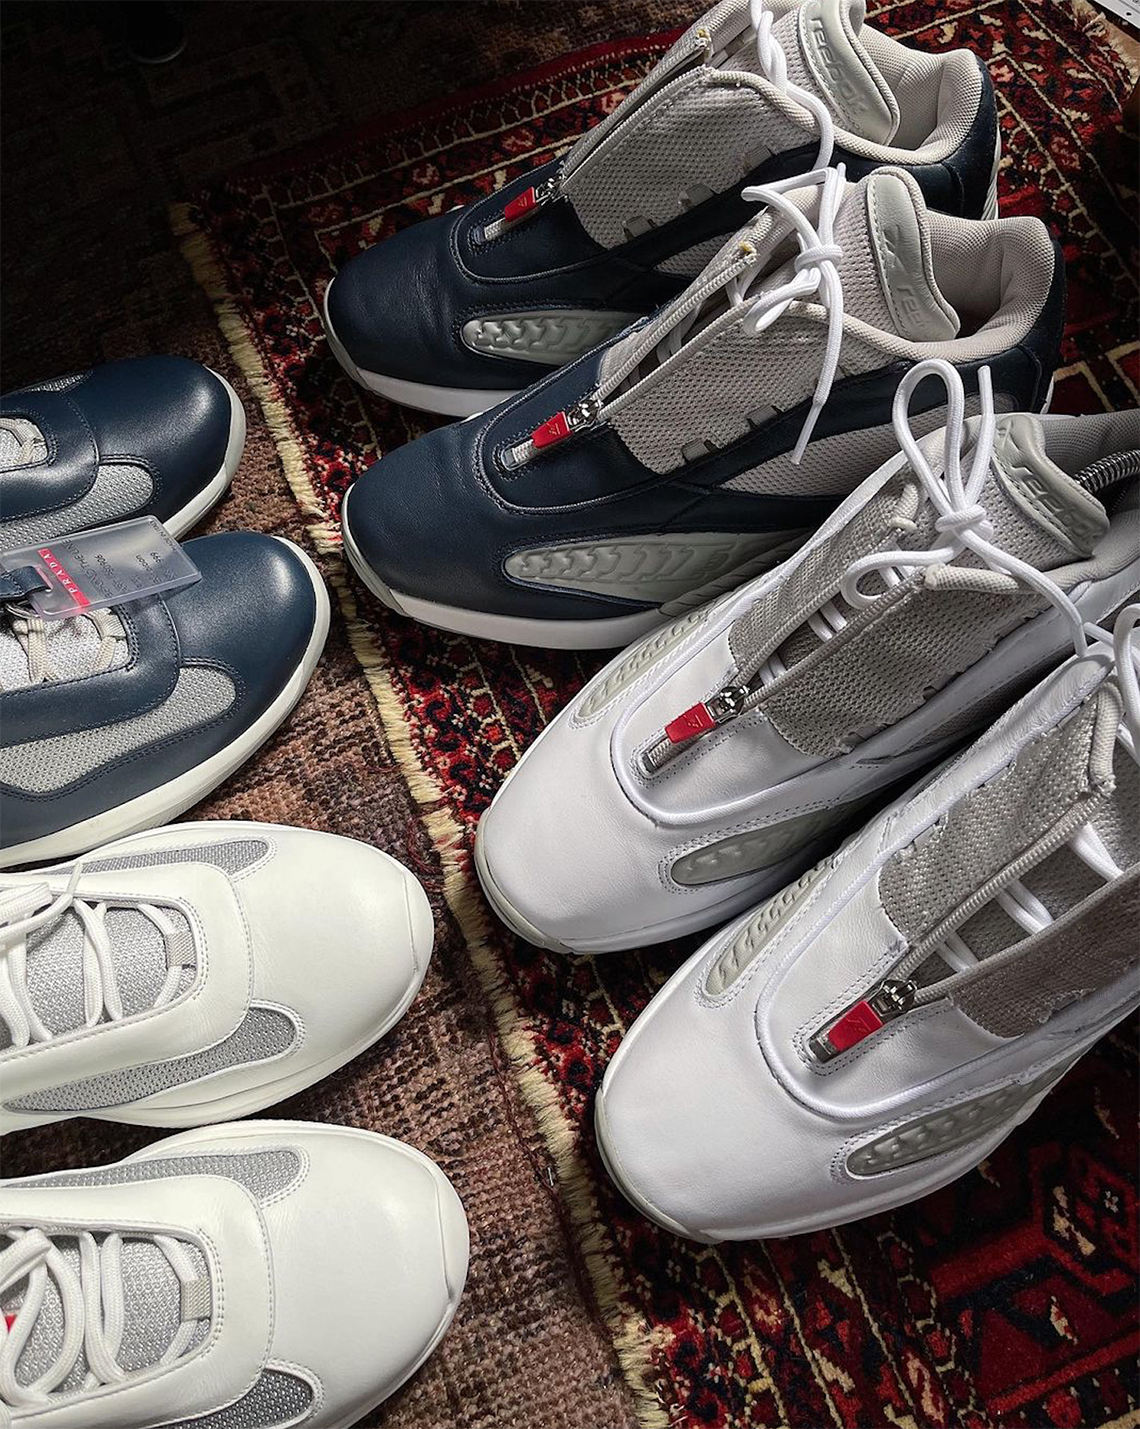 Packer ones Reebok Answer 4 White Silver 4